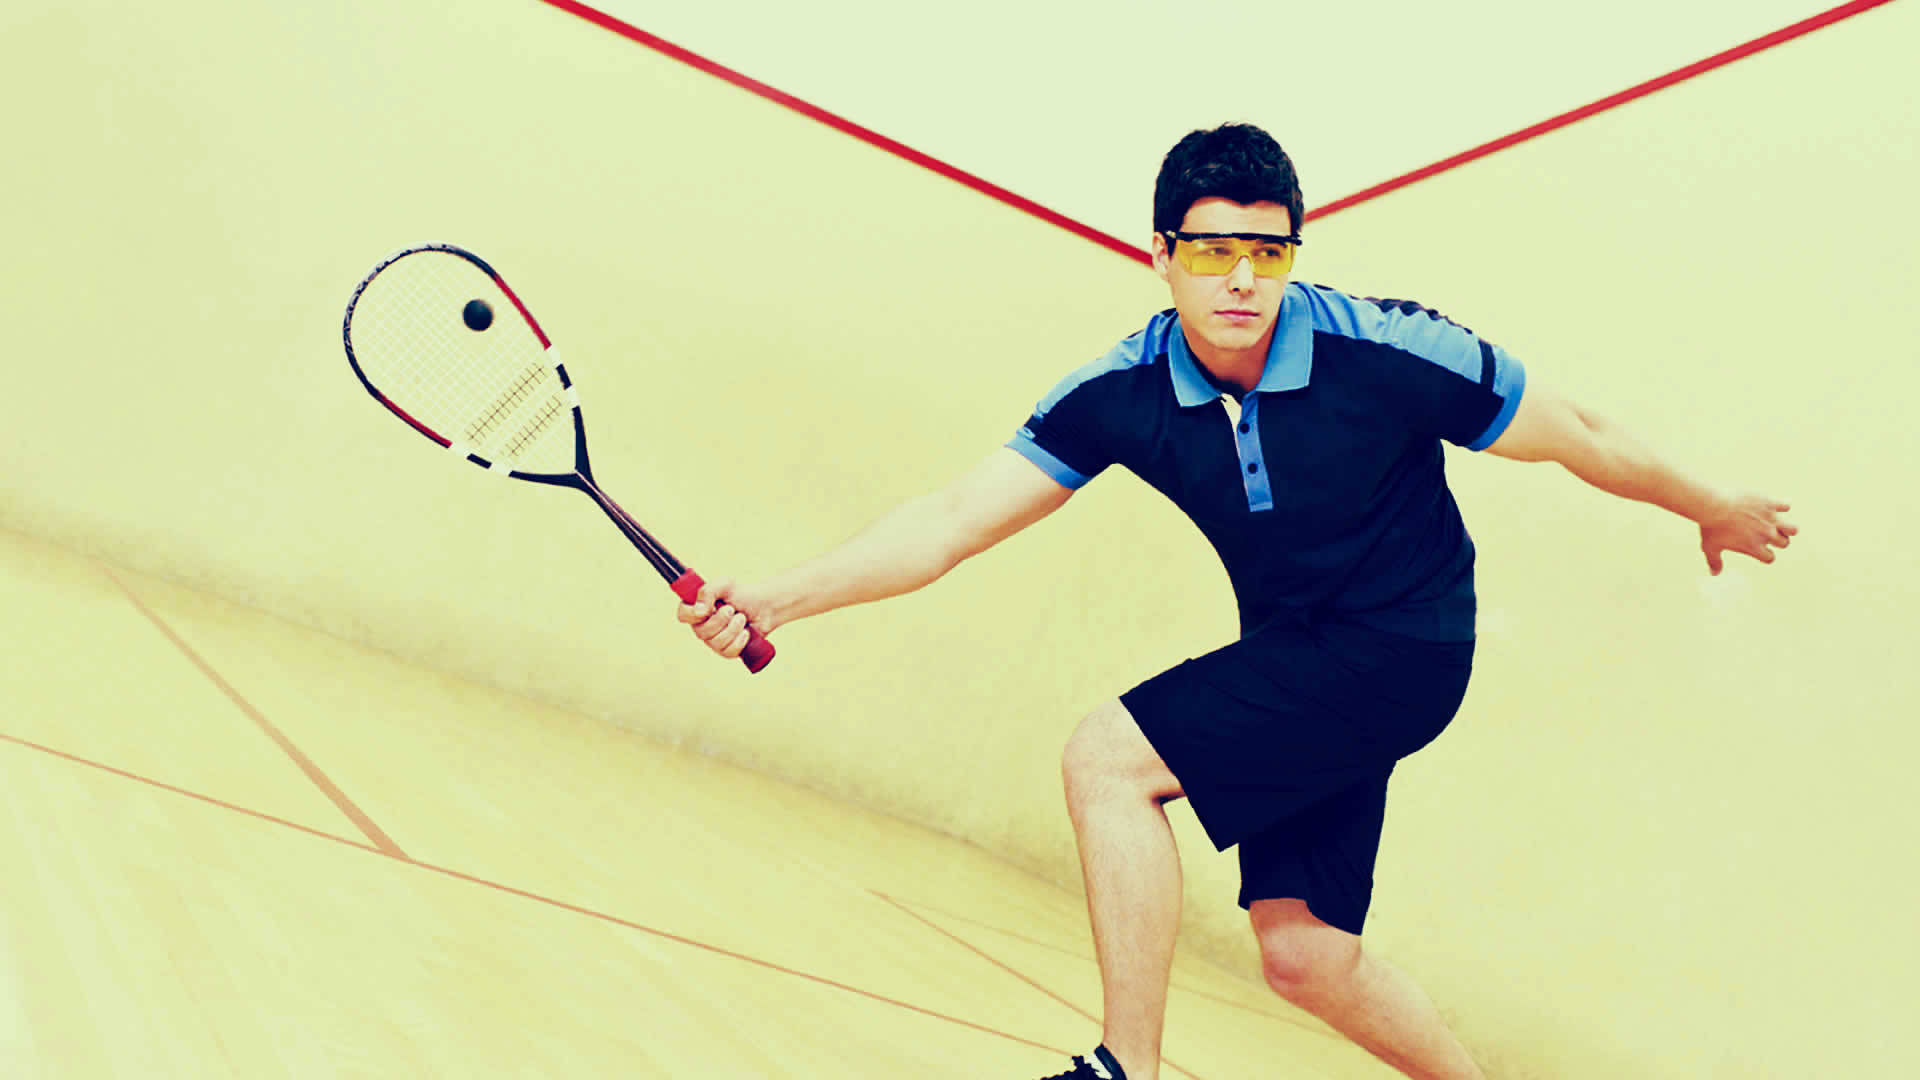 Man With Yellow Goggles Playing Squash Wallpaper